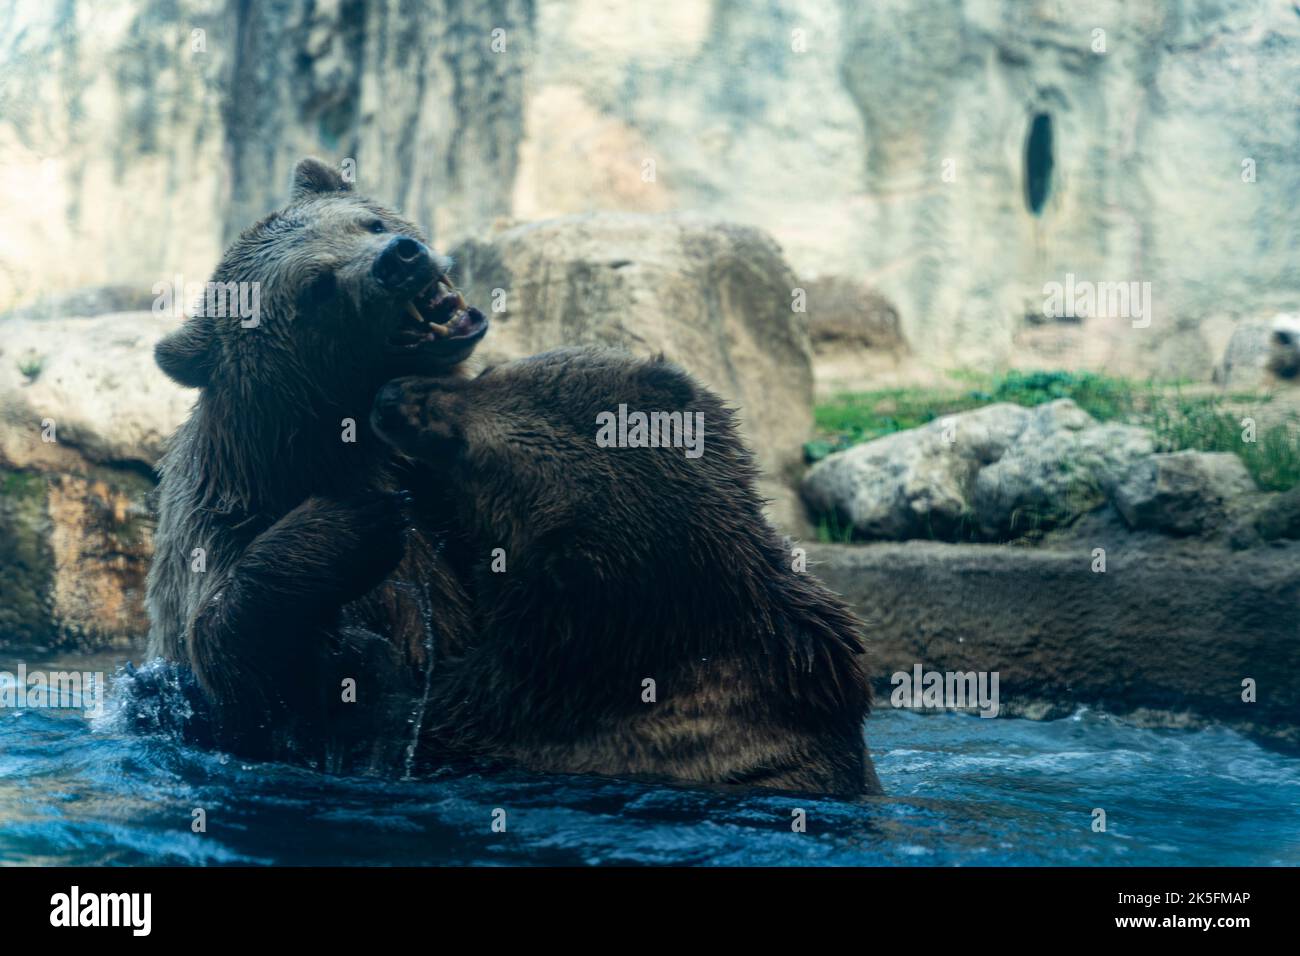 brown bear (Ursus arctos) fighting in water, Bioparco di Roma, Rome zoo, Italy Stock Photo